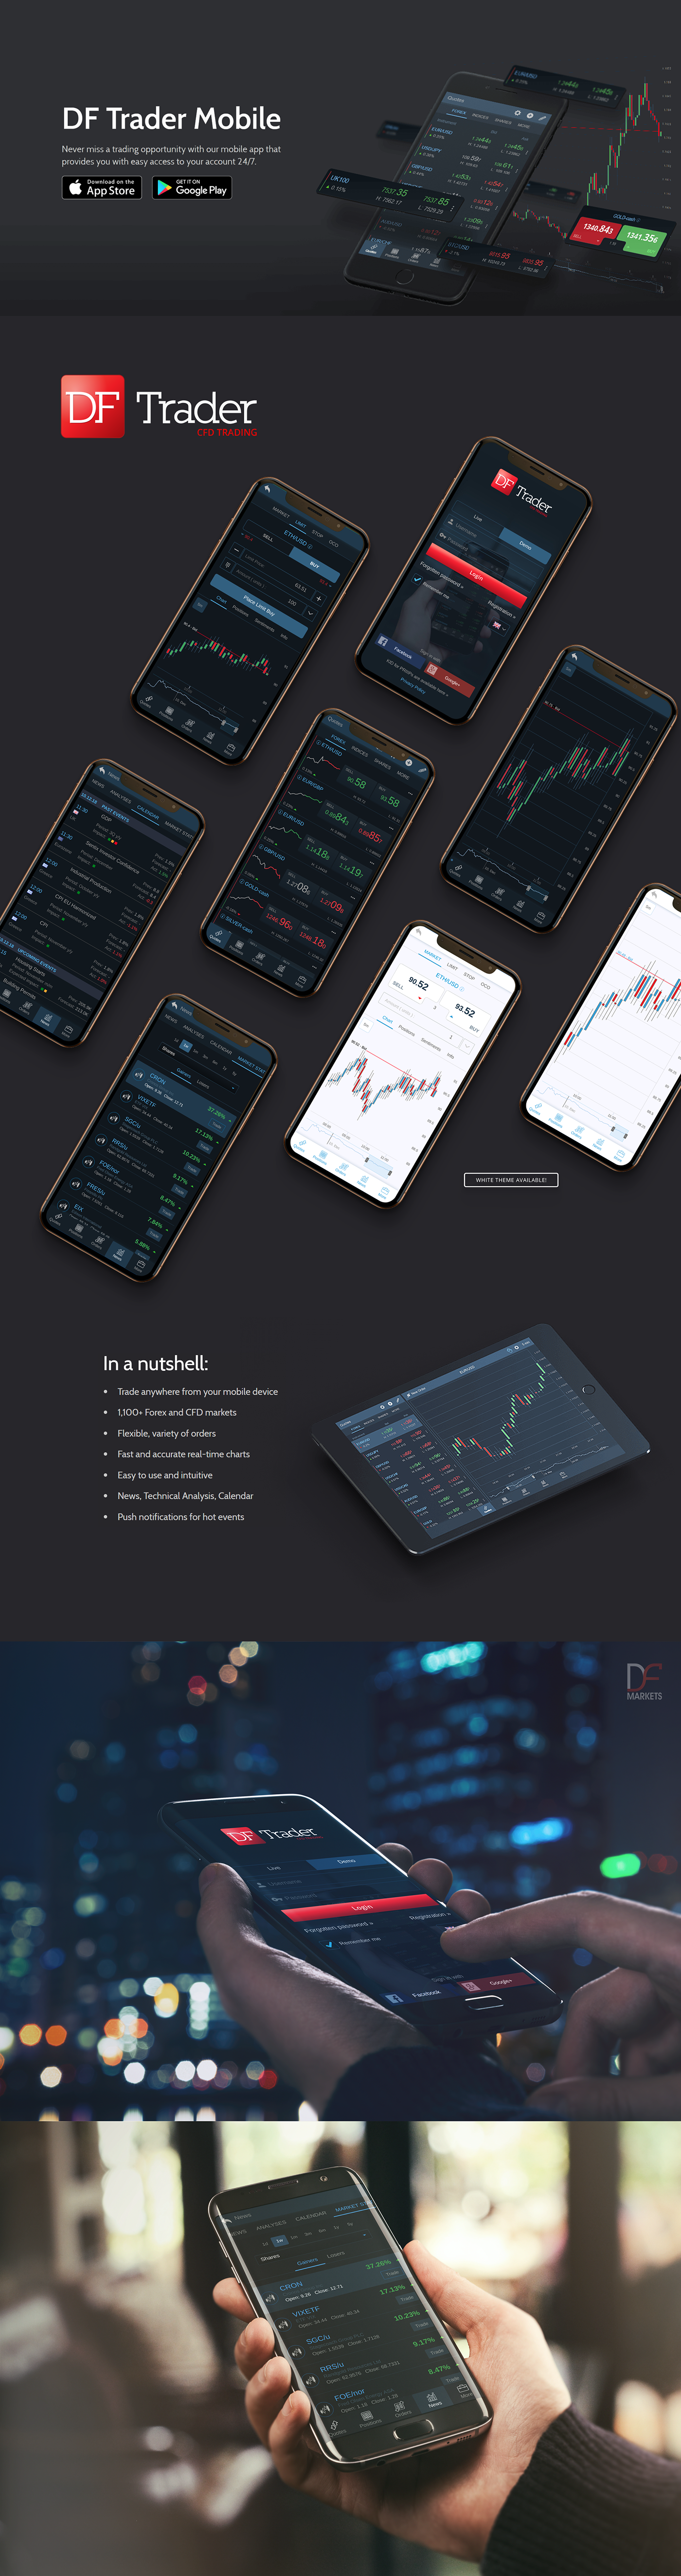 trading Forex cryptocurrency CFD markets UI/UX